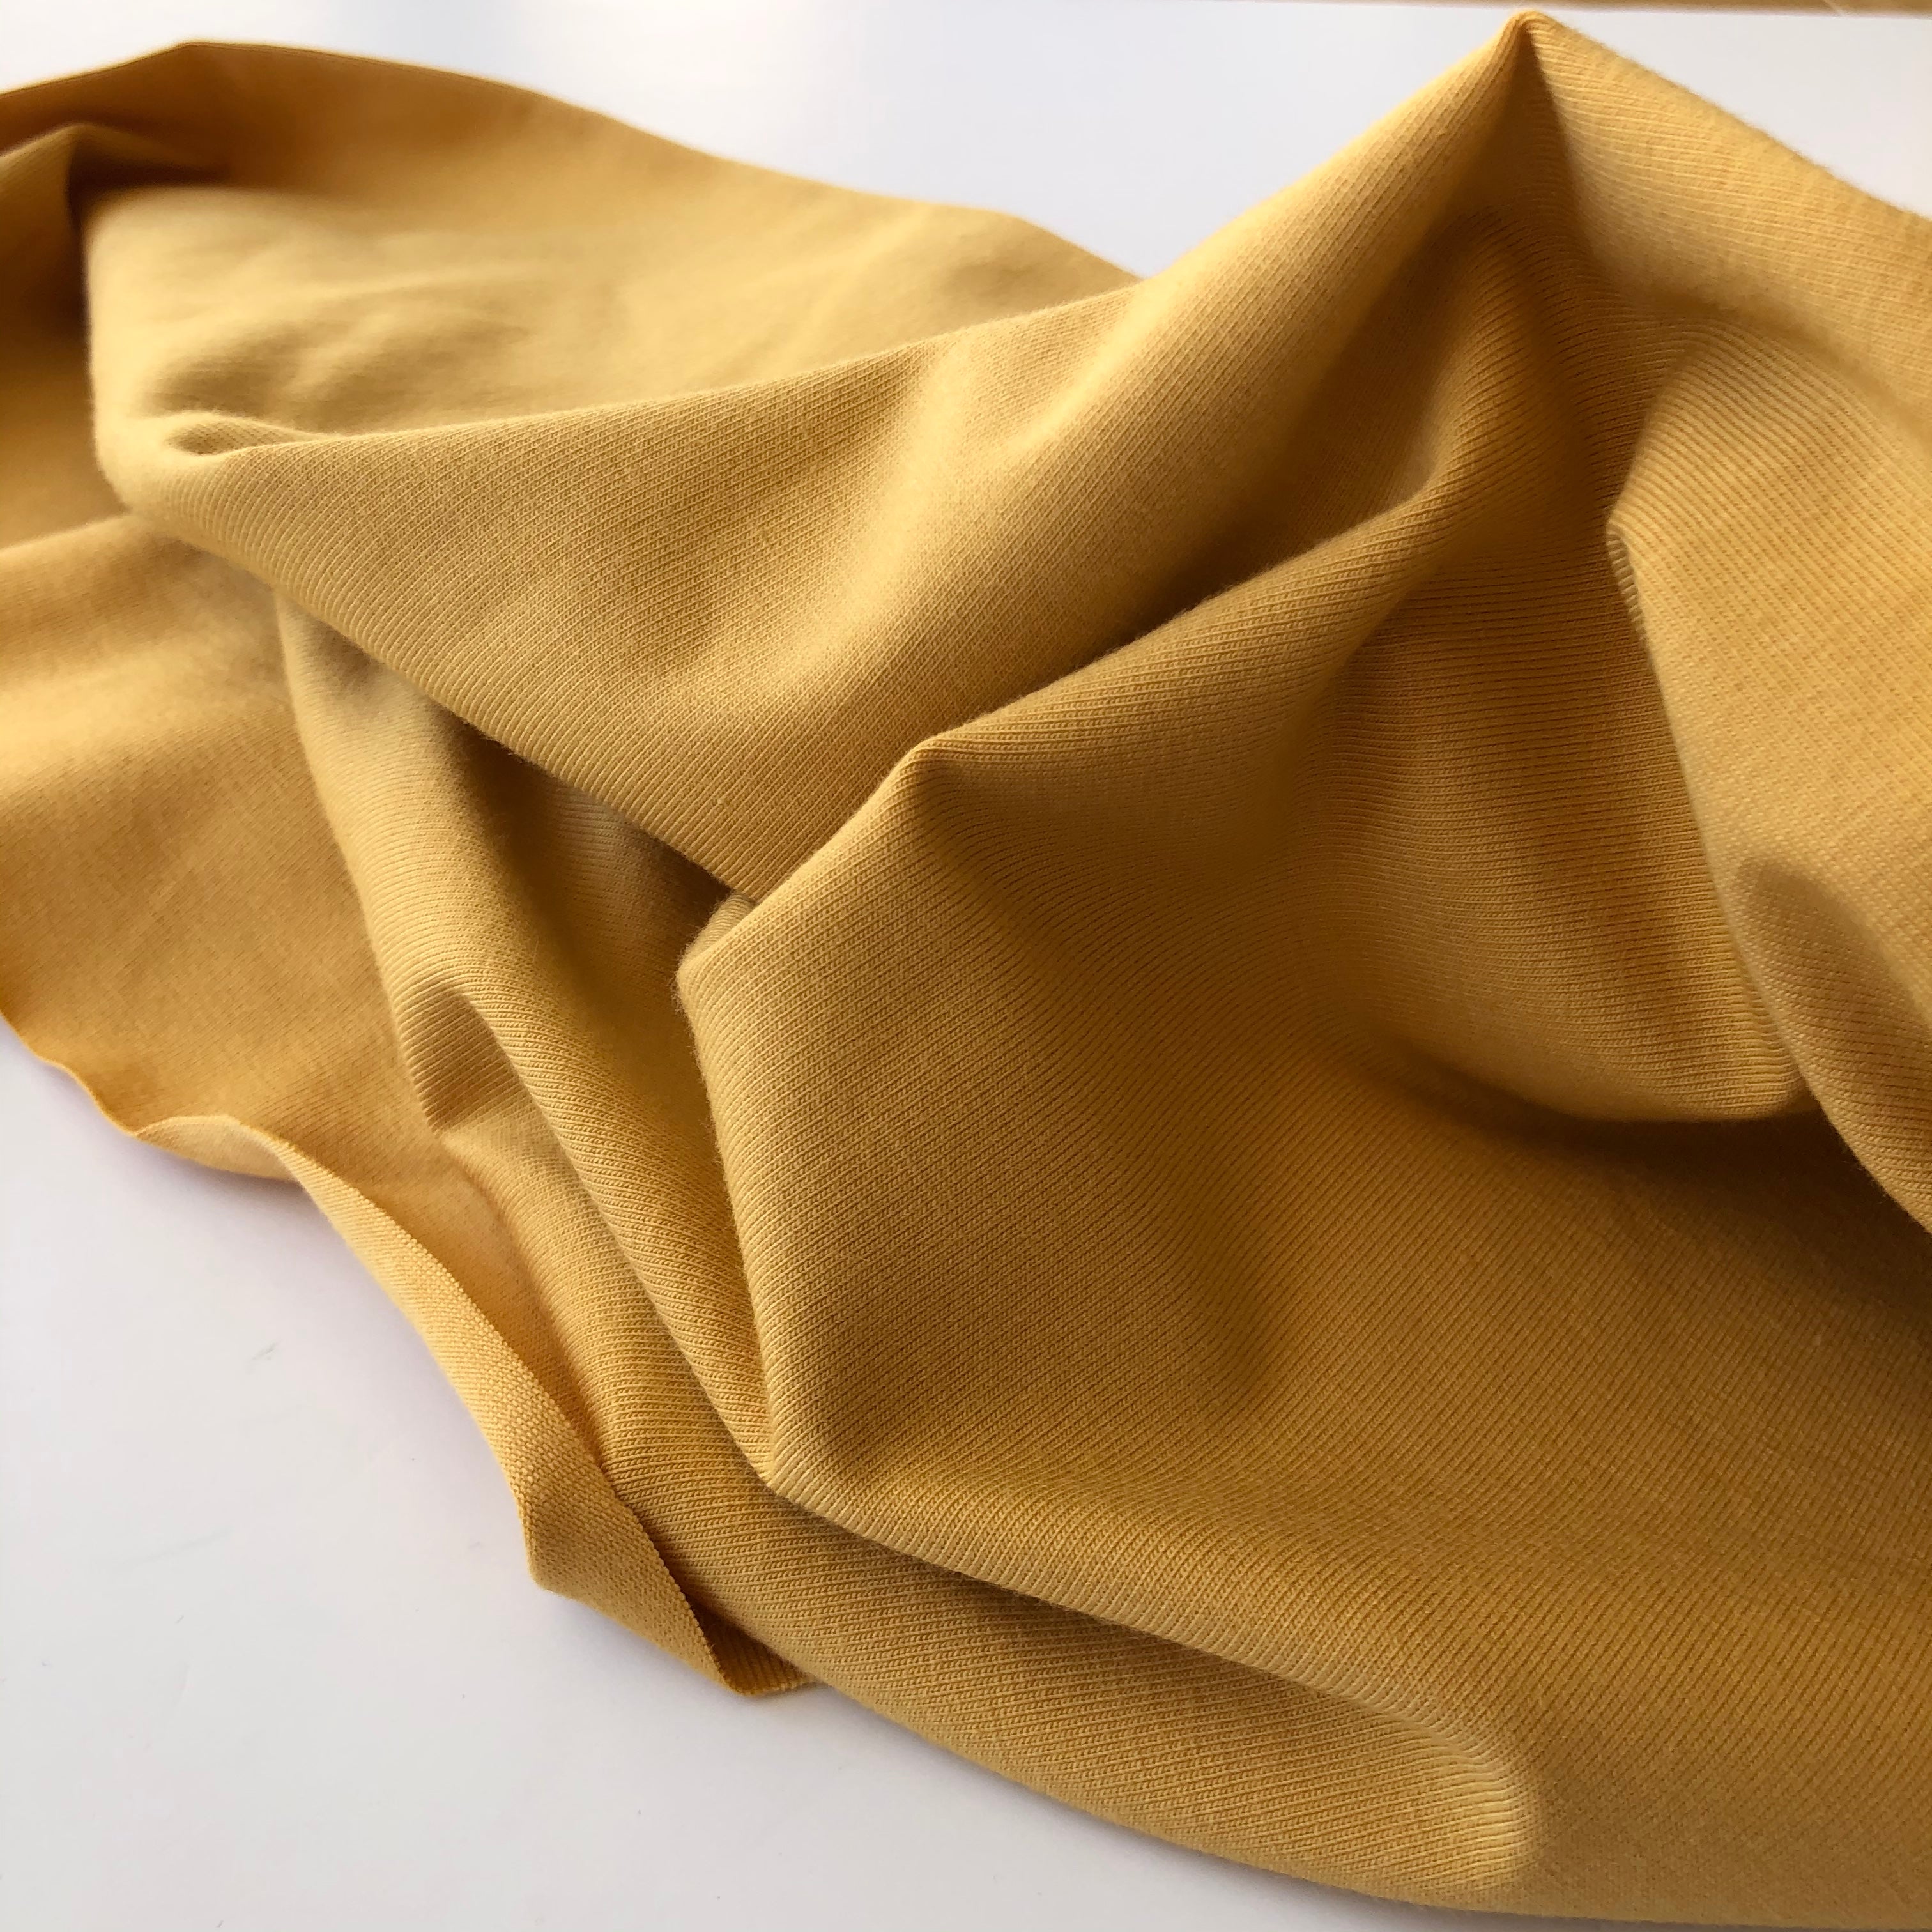 REMNANT 1.00 Metre with washable dirt marks - Essential Chic Amber Plain Cotton Jersey Fabric